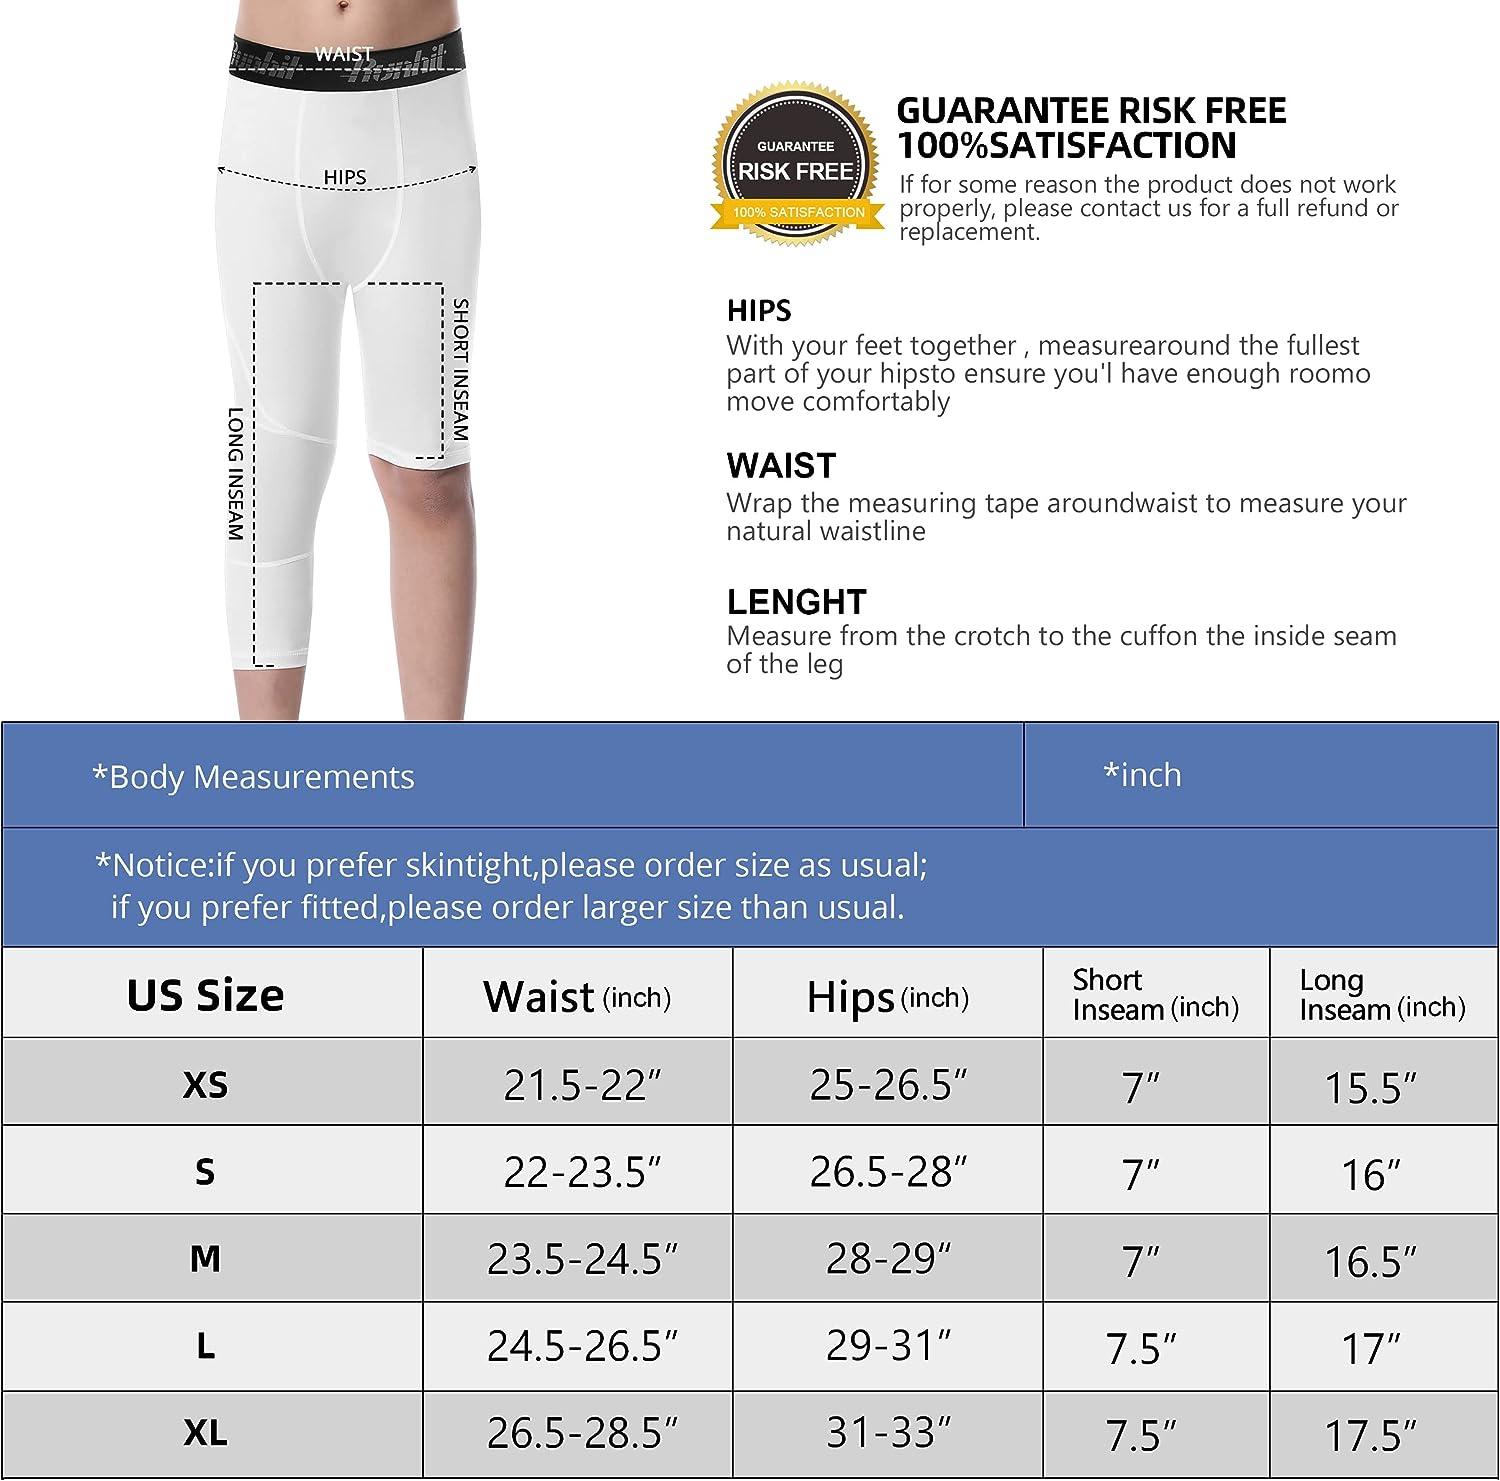 Runhit Boy's One Leg Compression Tights Leggings for Basketball Hockey  Running Youth Kids Athletic Pants Sports Base Layer White: 3/4 Long Right &  Short Half Left X-Large